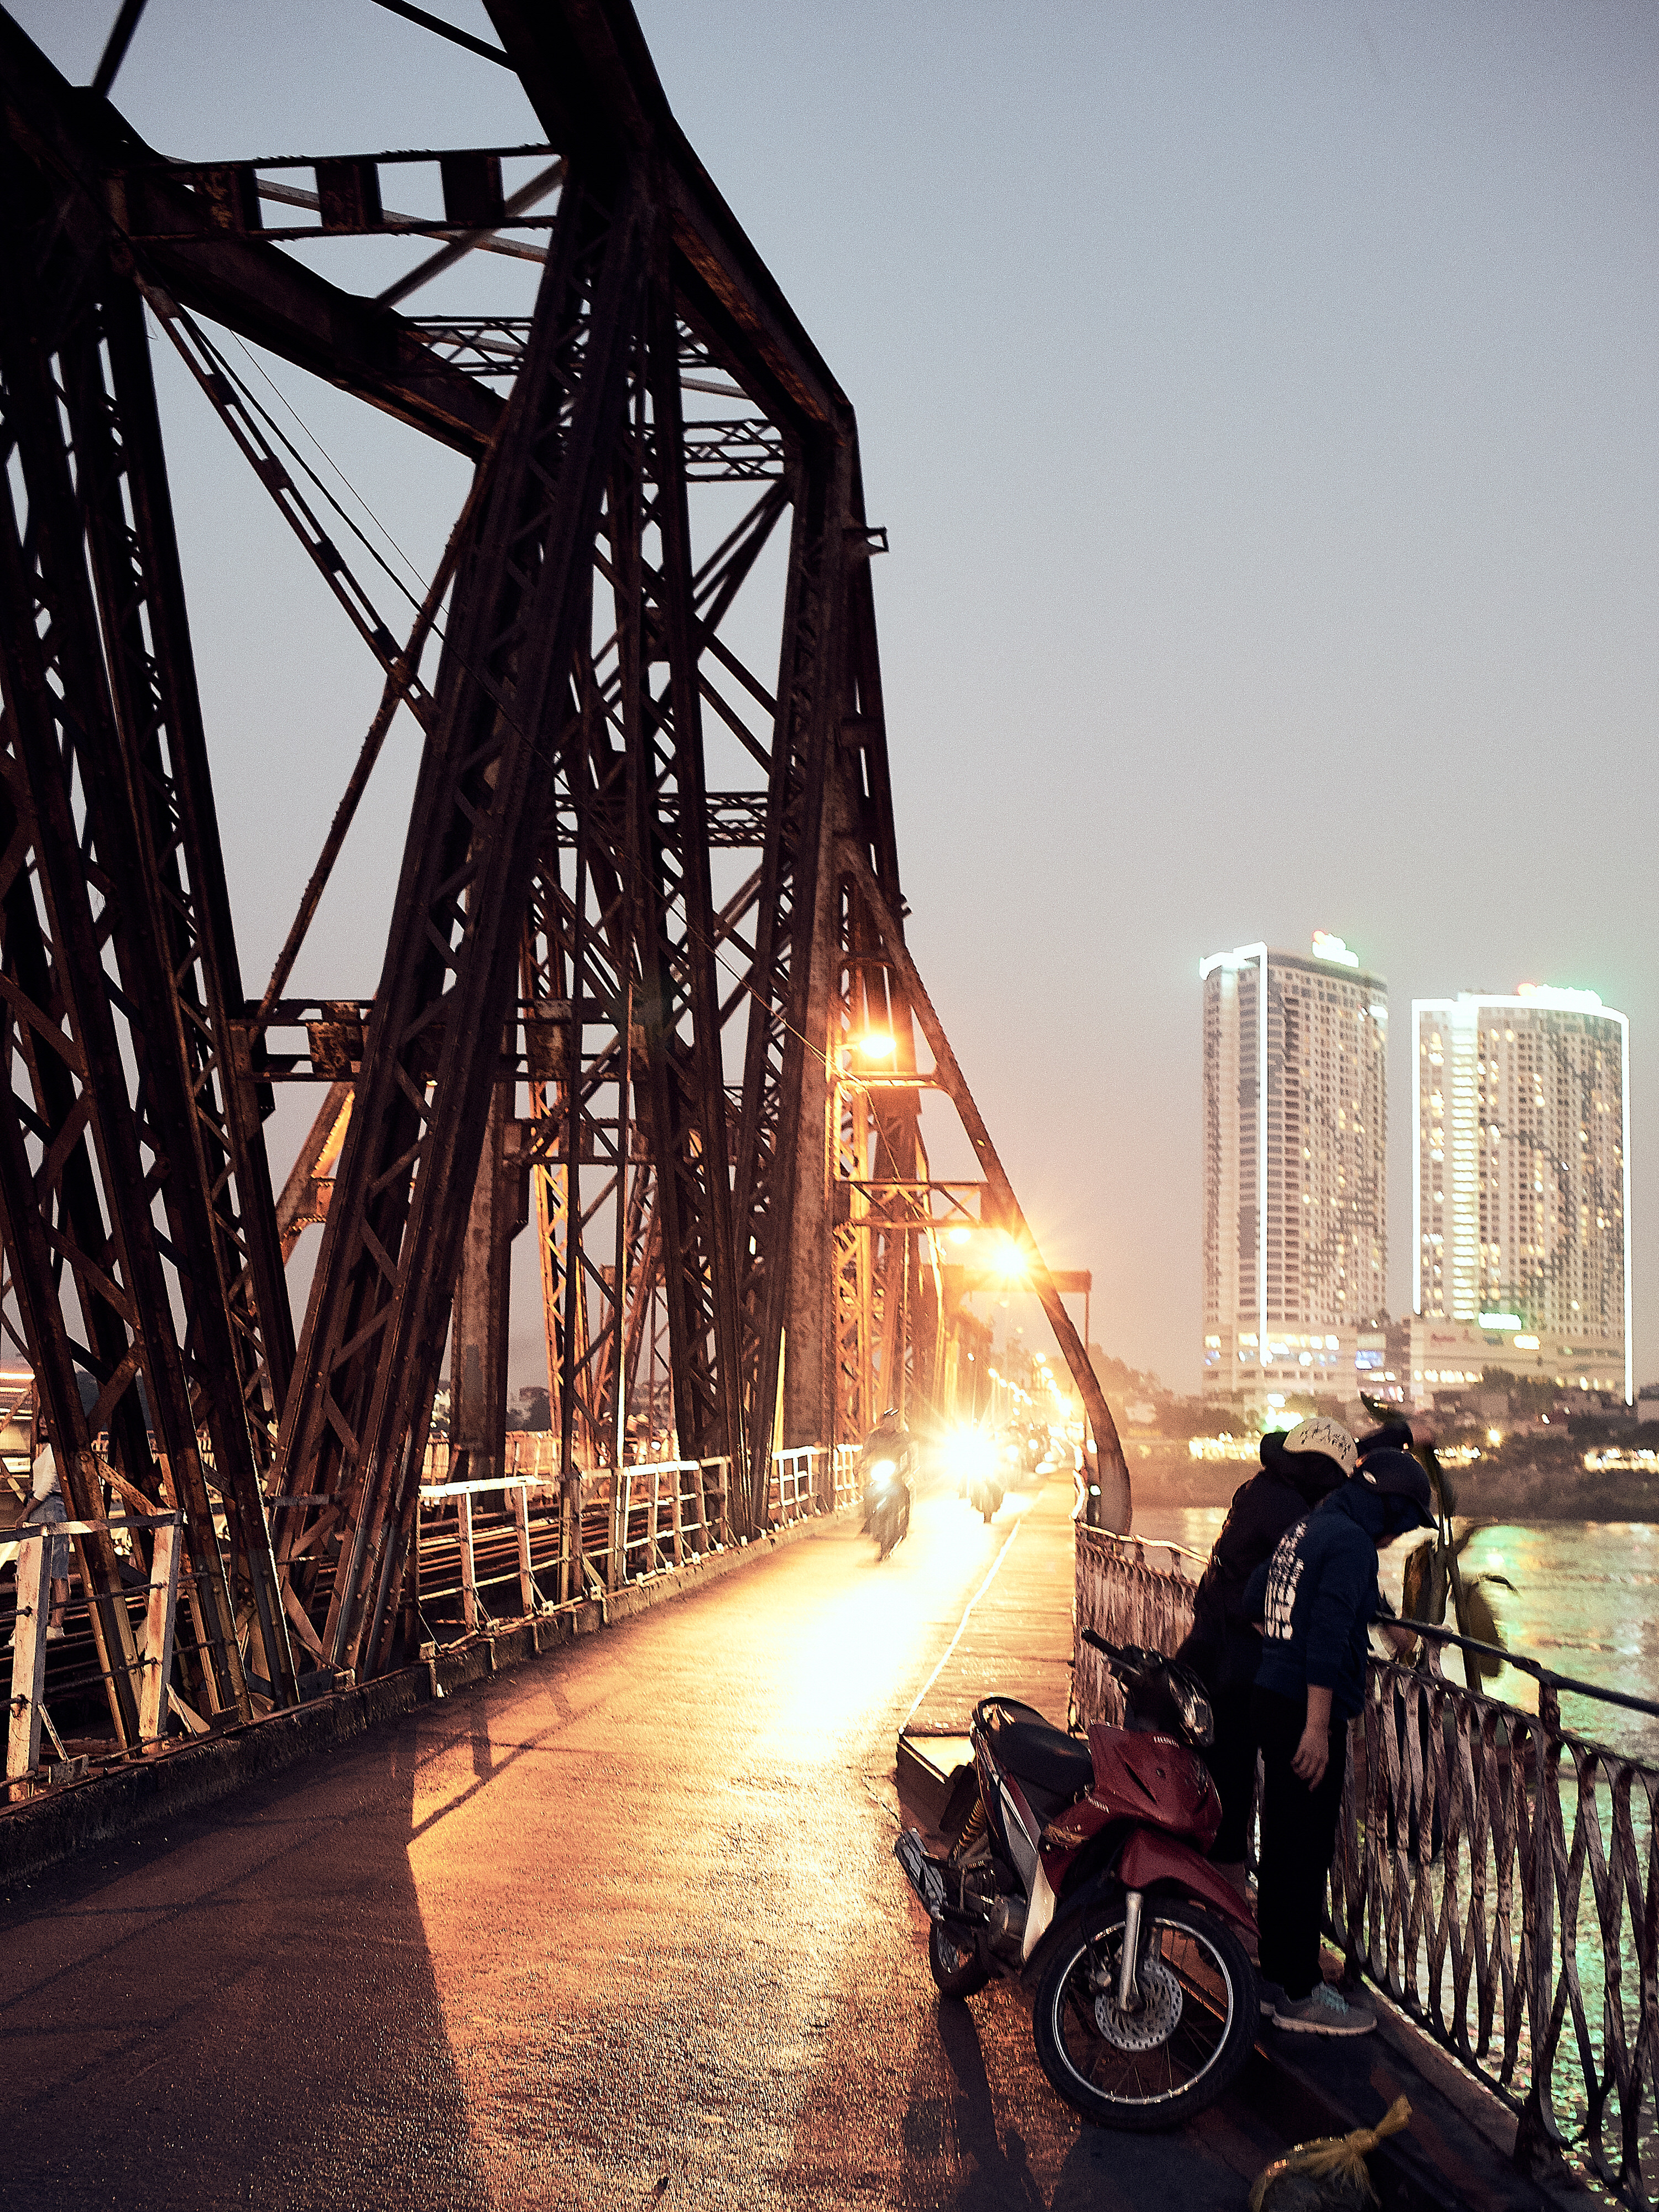 A couple with a motorcycle looking down Long Biên Bridge by night in Hanoi.